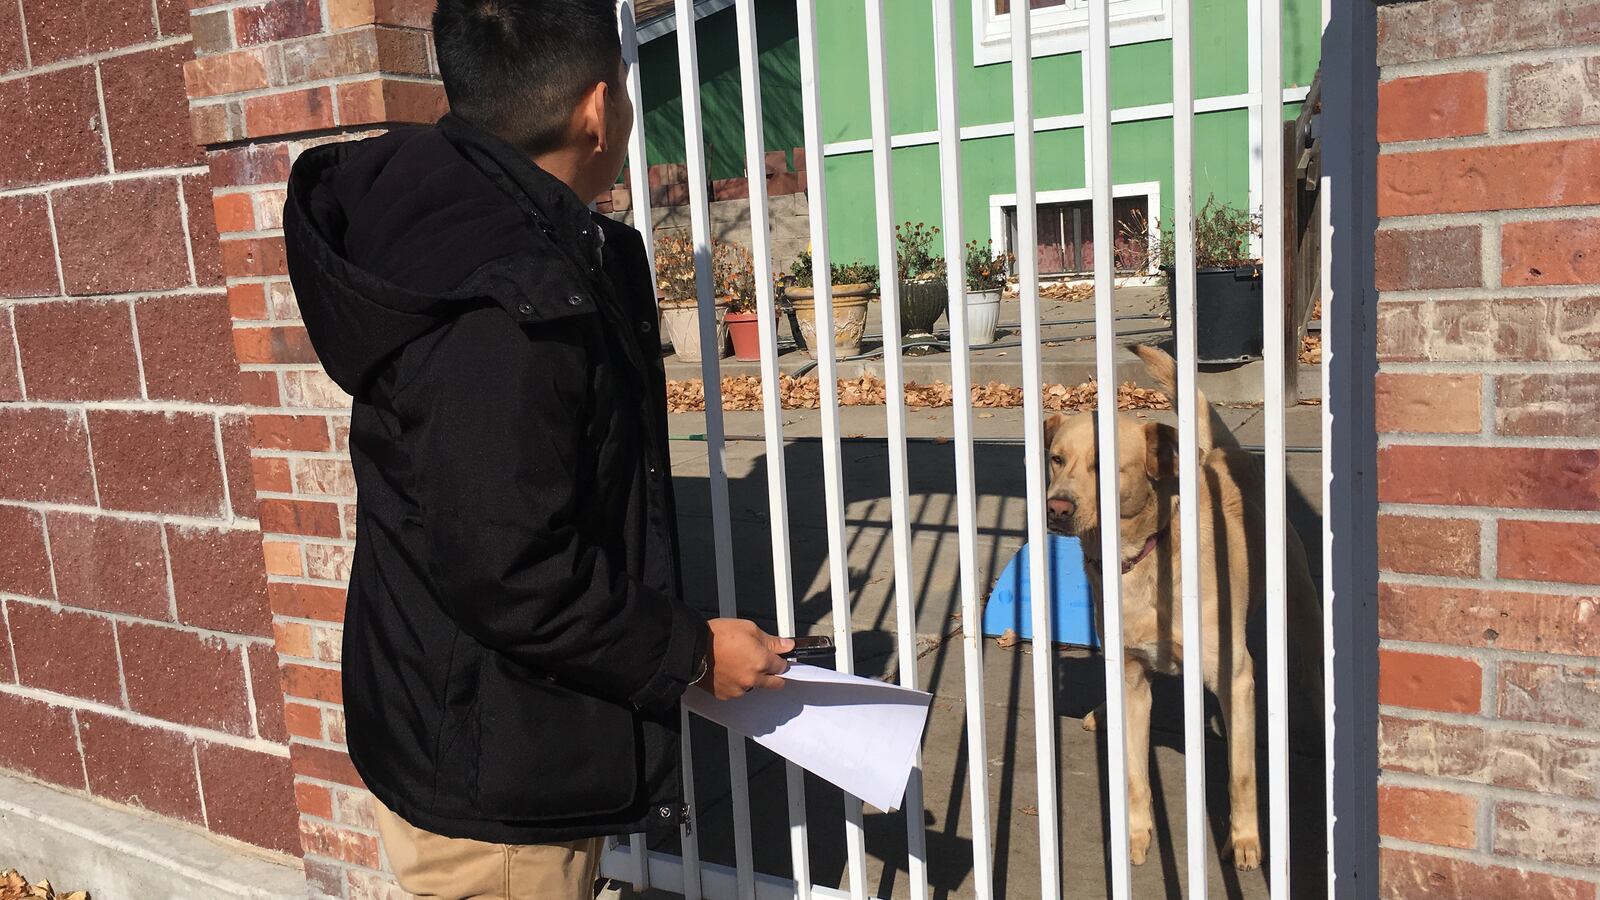 Bonifacio Sanchez Flores, a social worker at Grant Beacon Middle School, visits the home of a student who didn't come to school on Halloween.